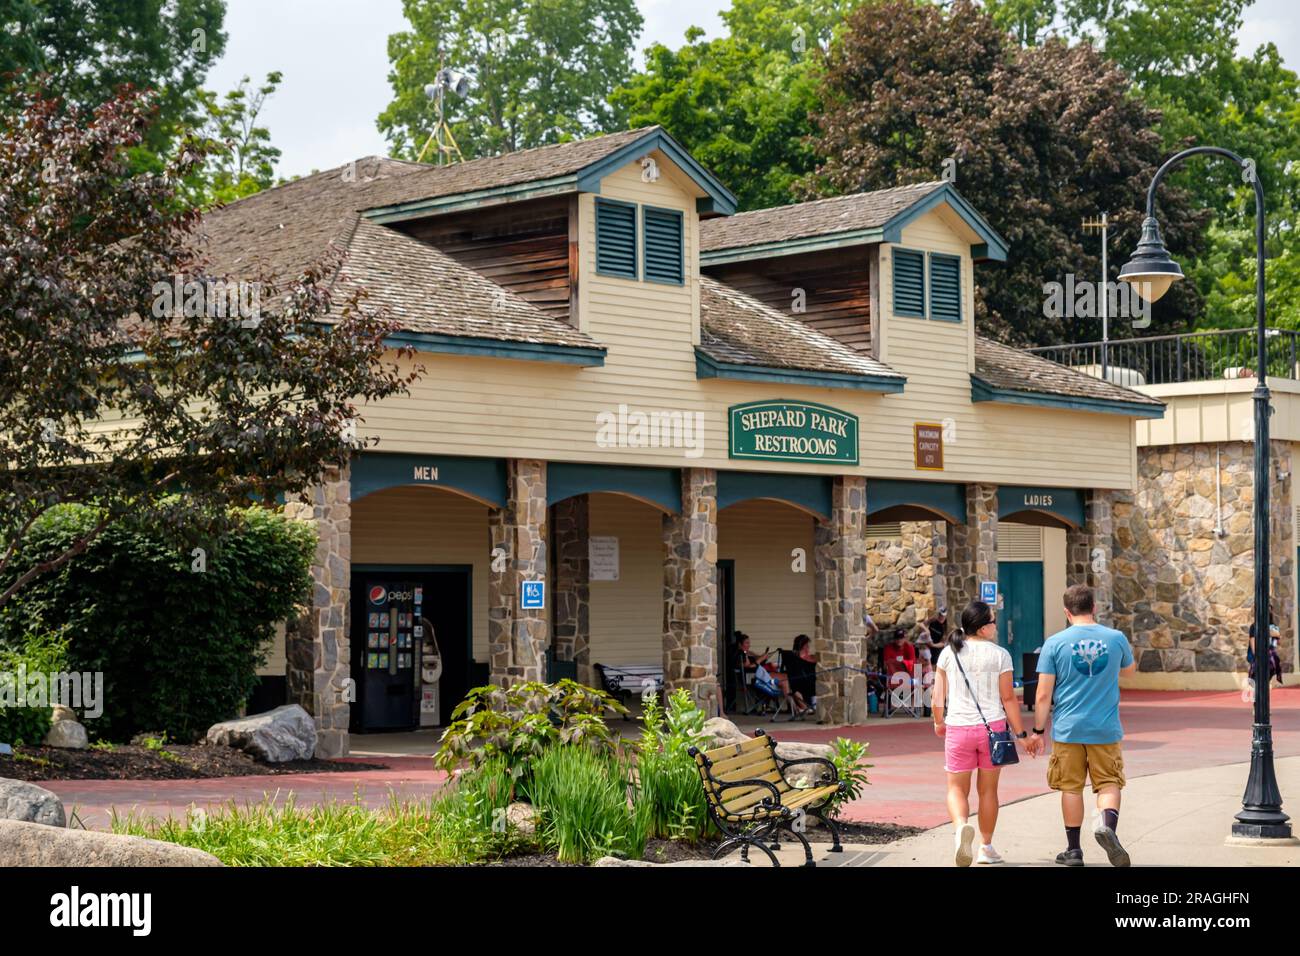 Outside Public restrooms in Lake George Village New York Stock Photo